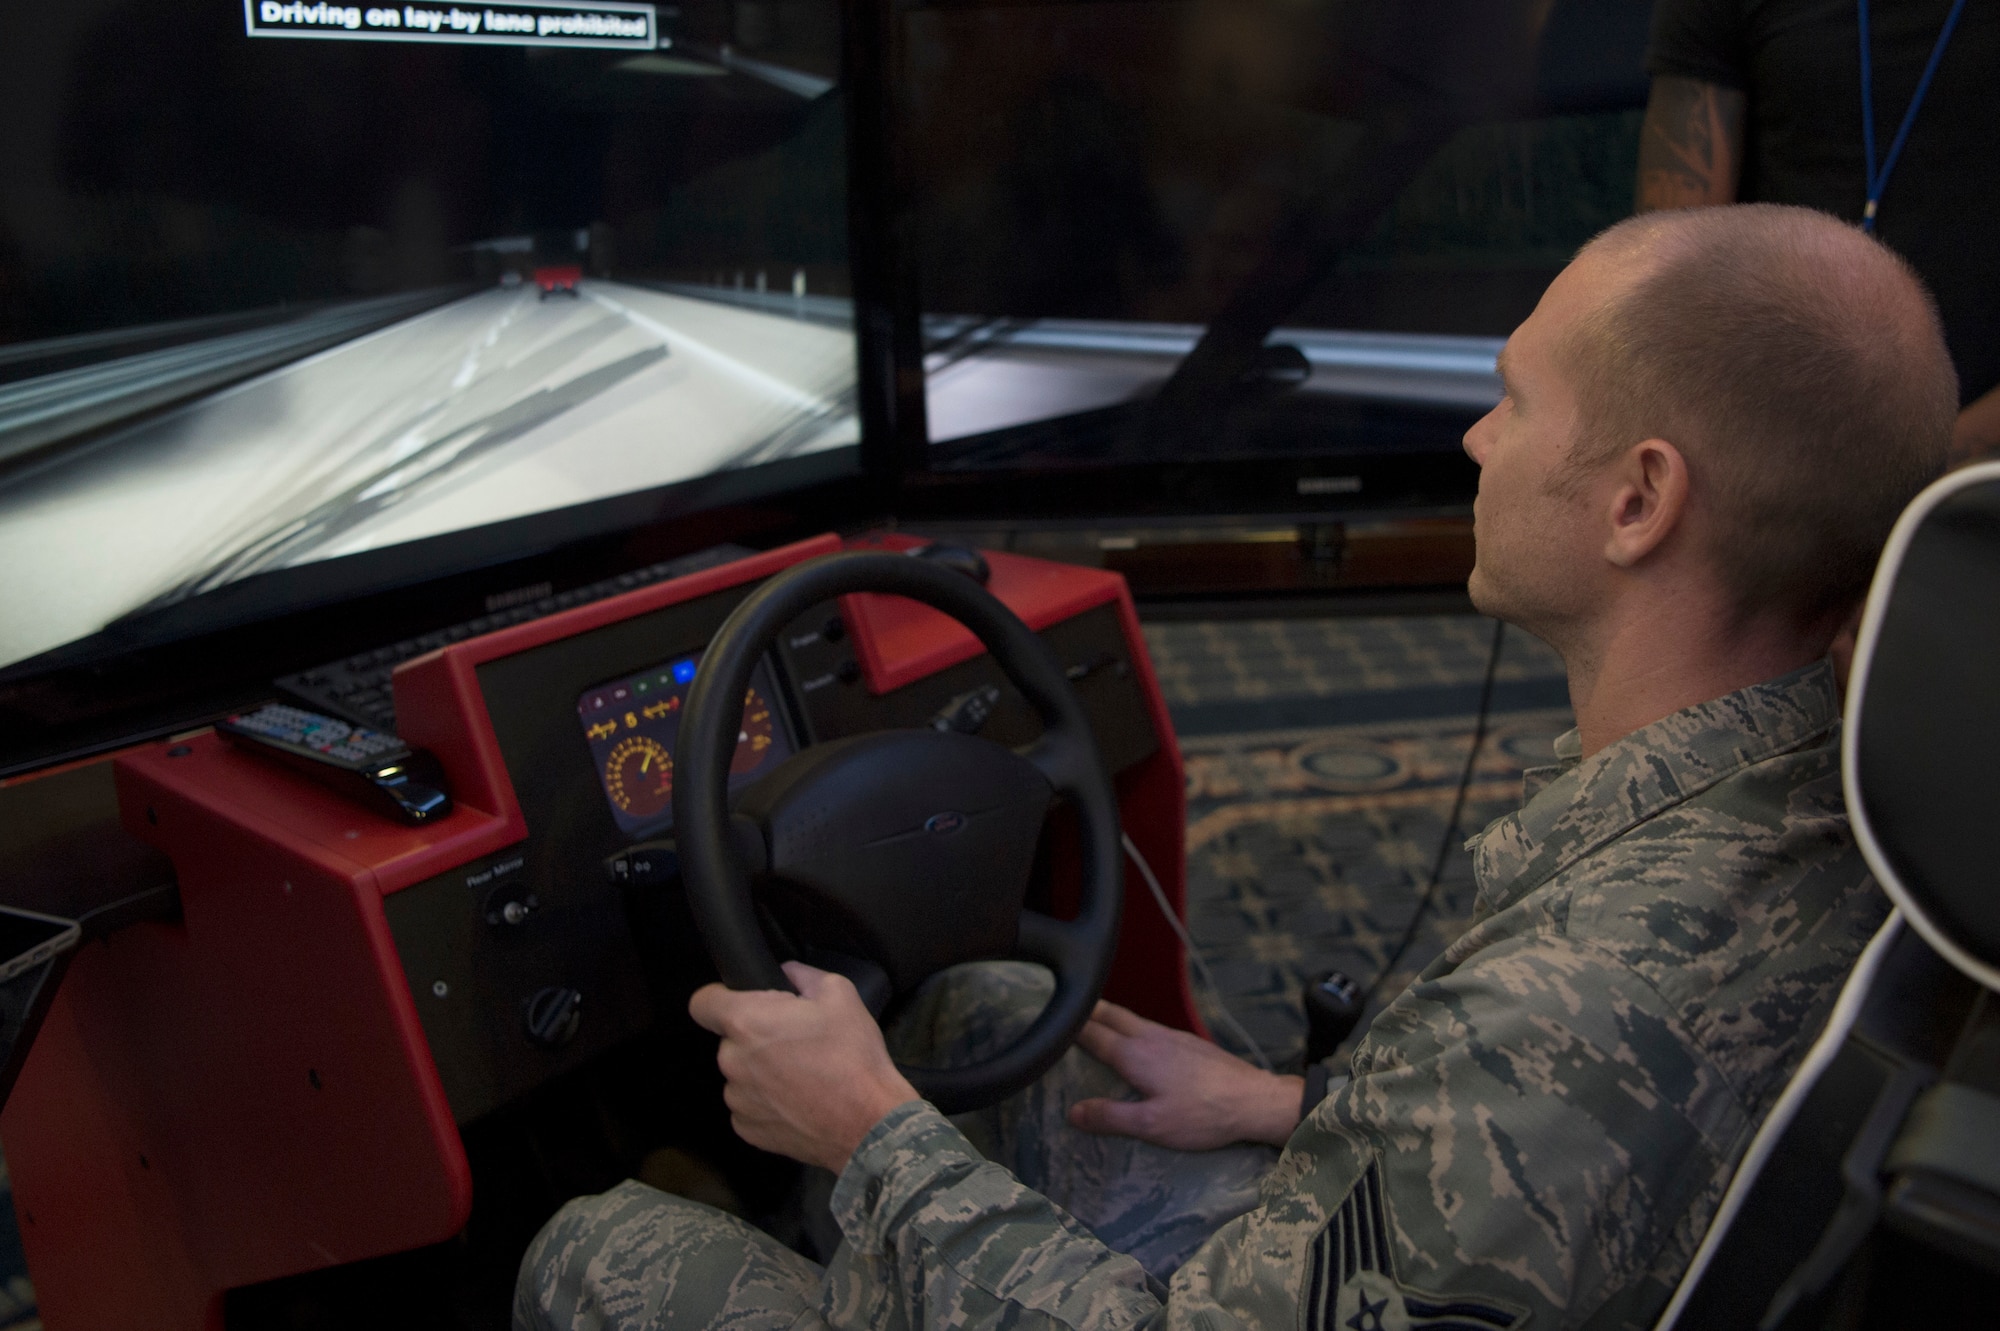 The driving simulator to was created to discourage people from drinking and driving